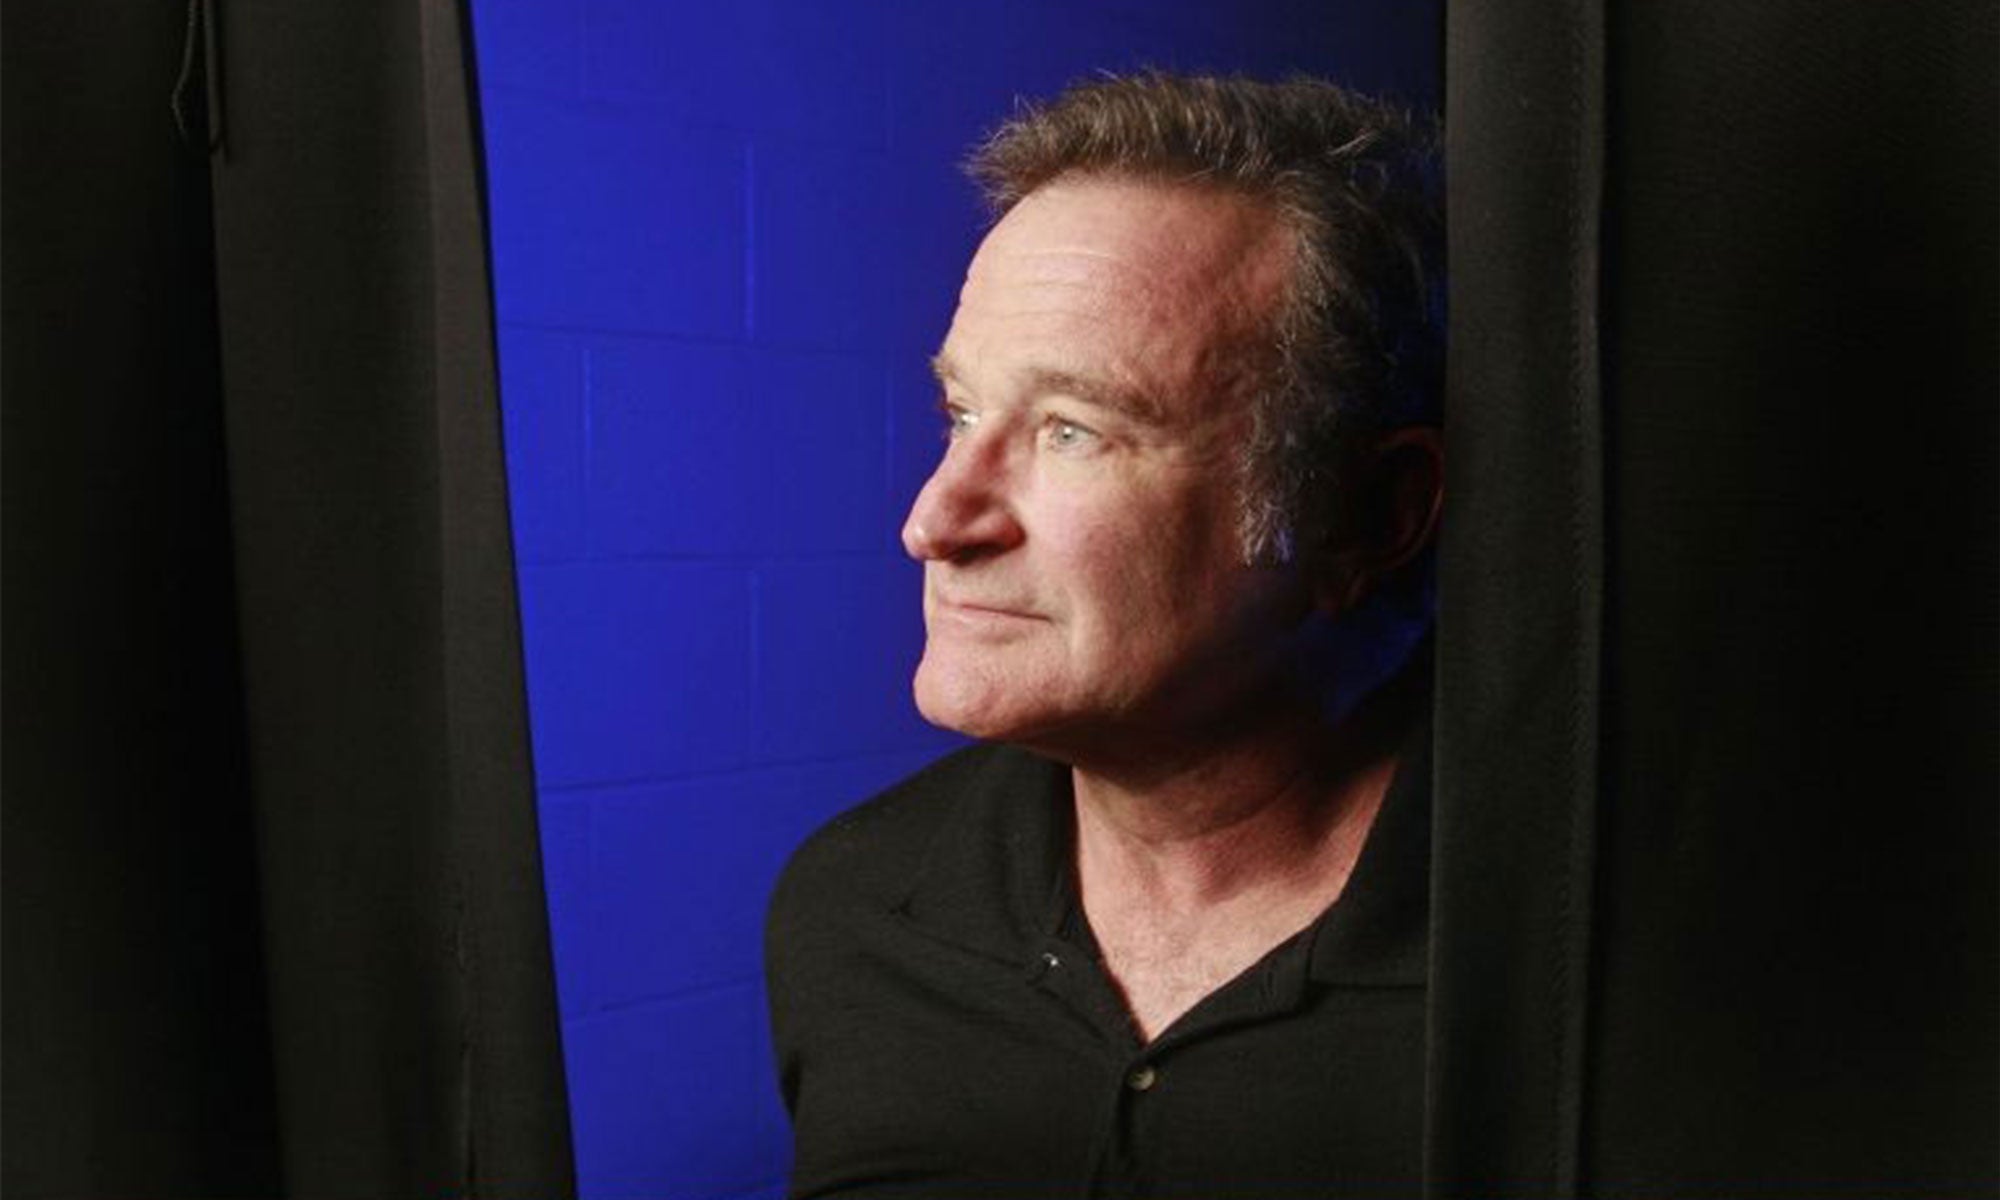 Robin Williams dead: Actor was found hanging in his bedroom by his